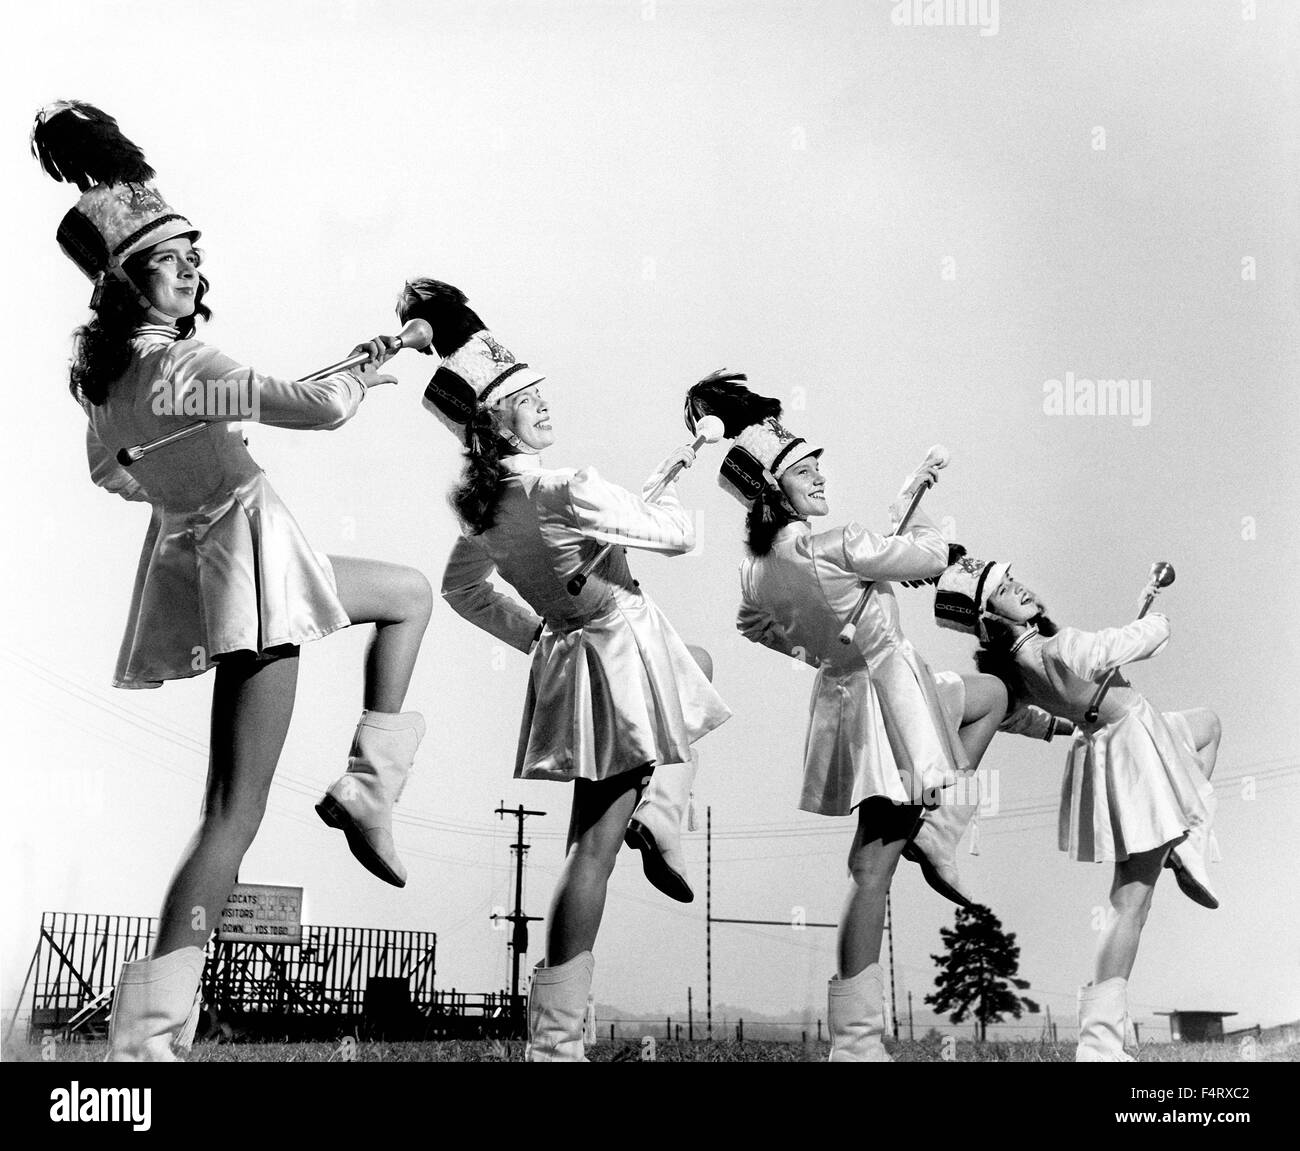 Oak Ridge High School Drum Majoretees.1947. The town of Oak Ridge was established by the Army Corps of Engineers as part of the Stock Photo